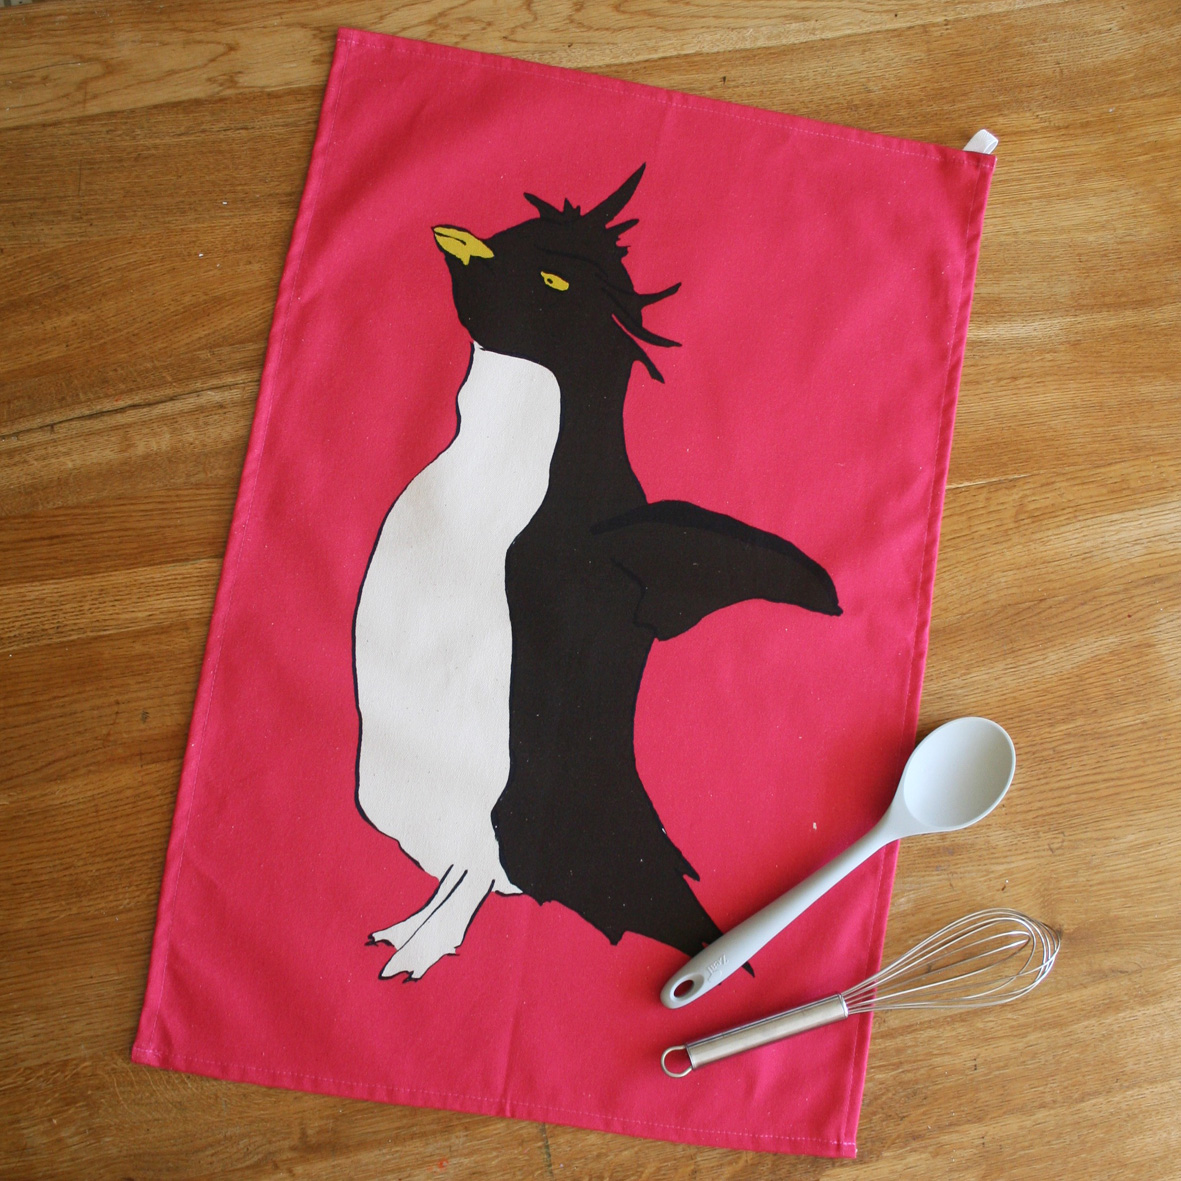 Up your kitchen game with a pop 💥🔥 of colour and cuteness! 💗🐧 Our vibrant pink tea towel, adorned with an adorable penguin, adds charm to your daily routine. Grab your penguin tea towel today! 🐧💗 #teatowels #penguin  #penguins  #penguinlover #birdlovers #TeaTowel